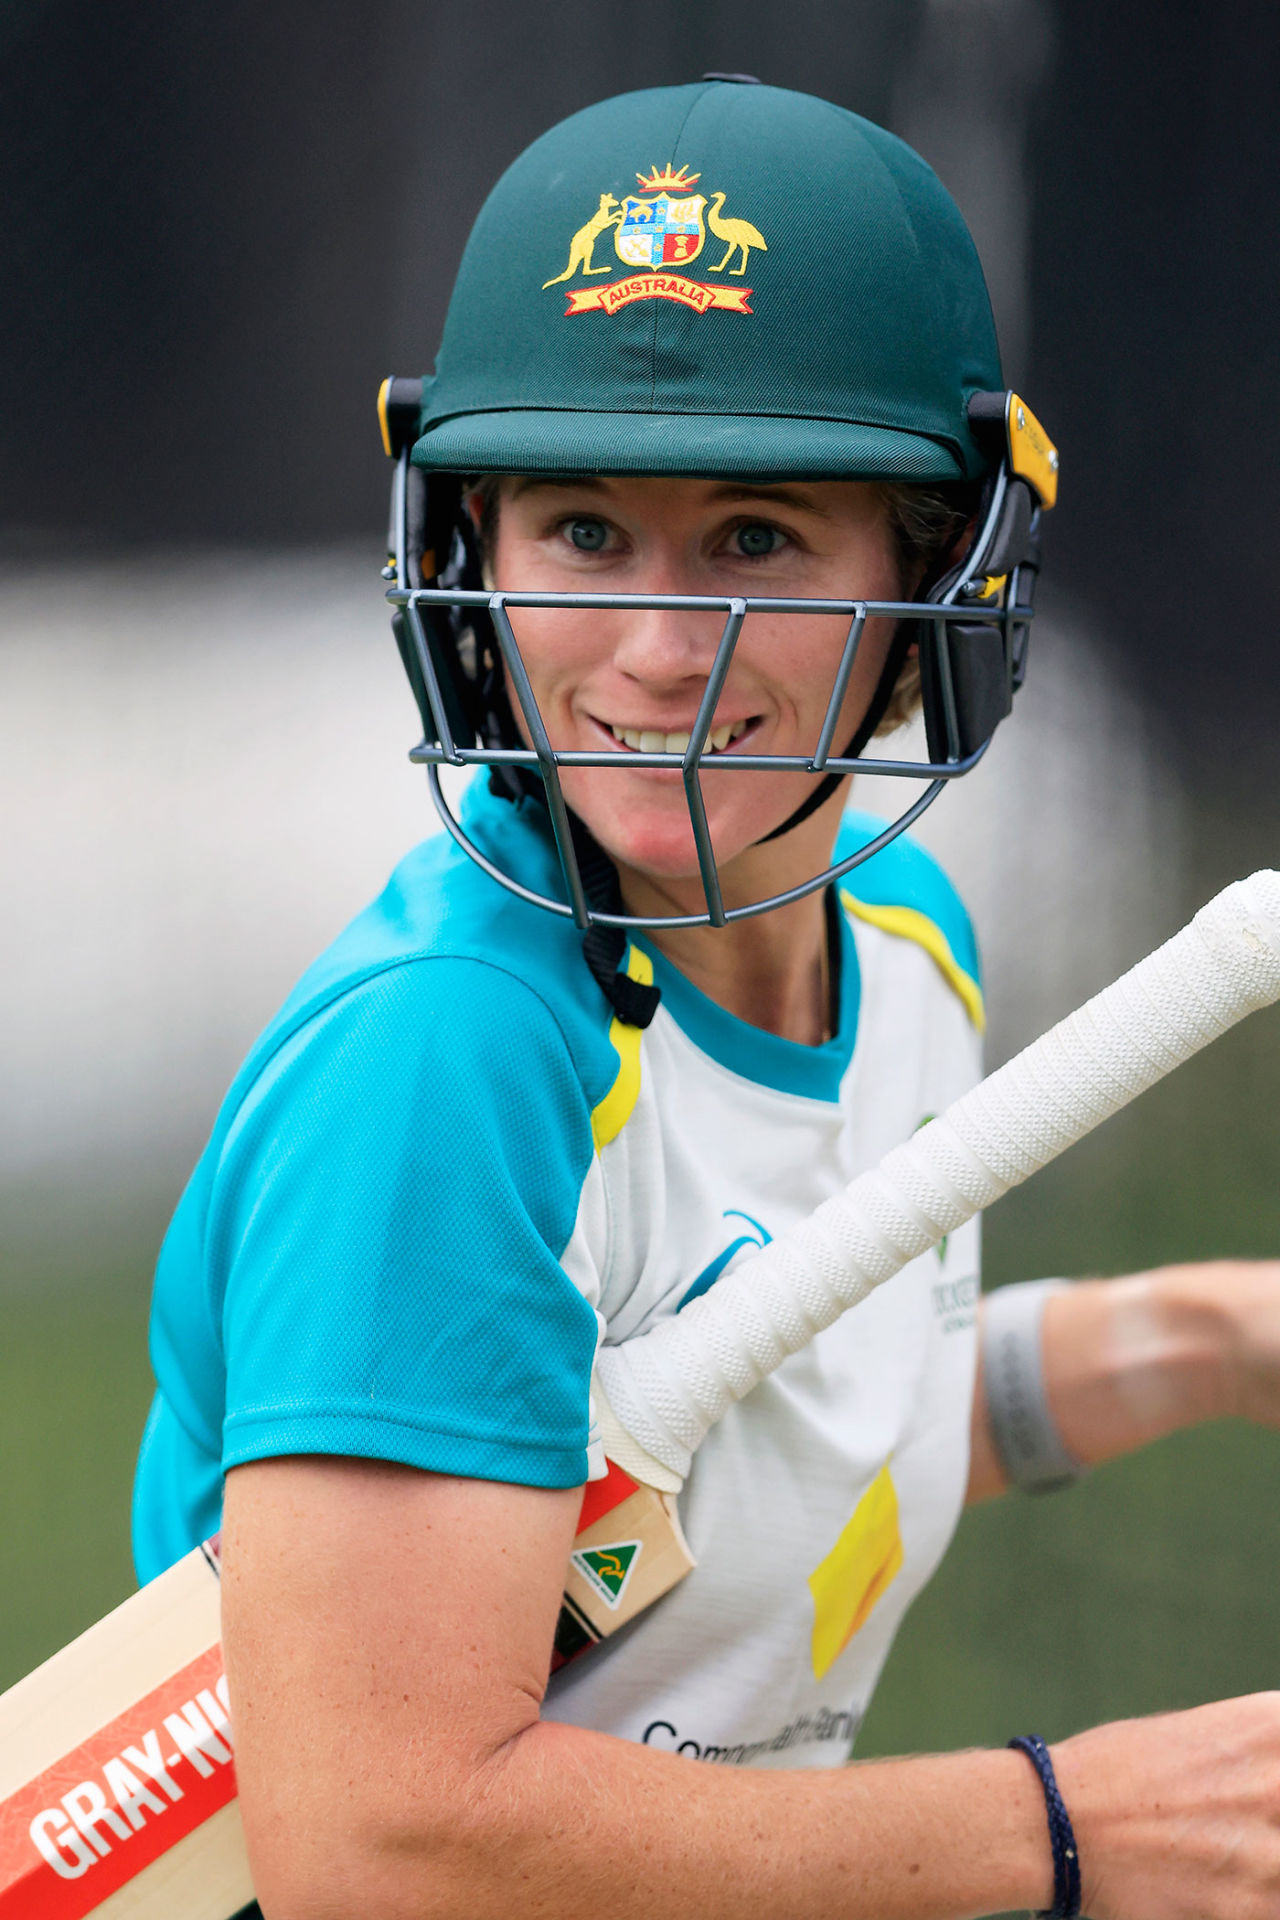 Beth Mooney could play the Ashes Test just days after surgery, Canberra, January 25, 2022